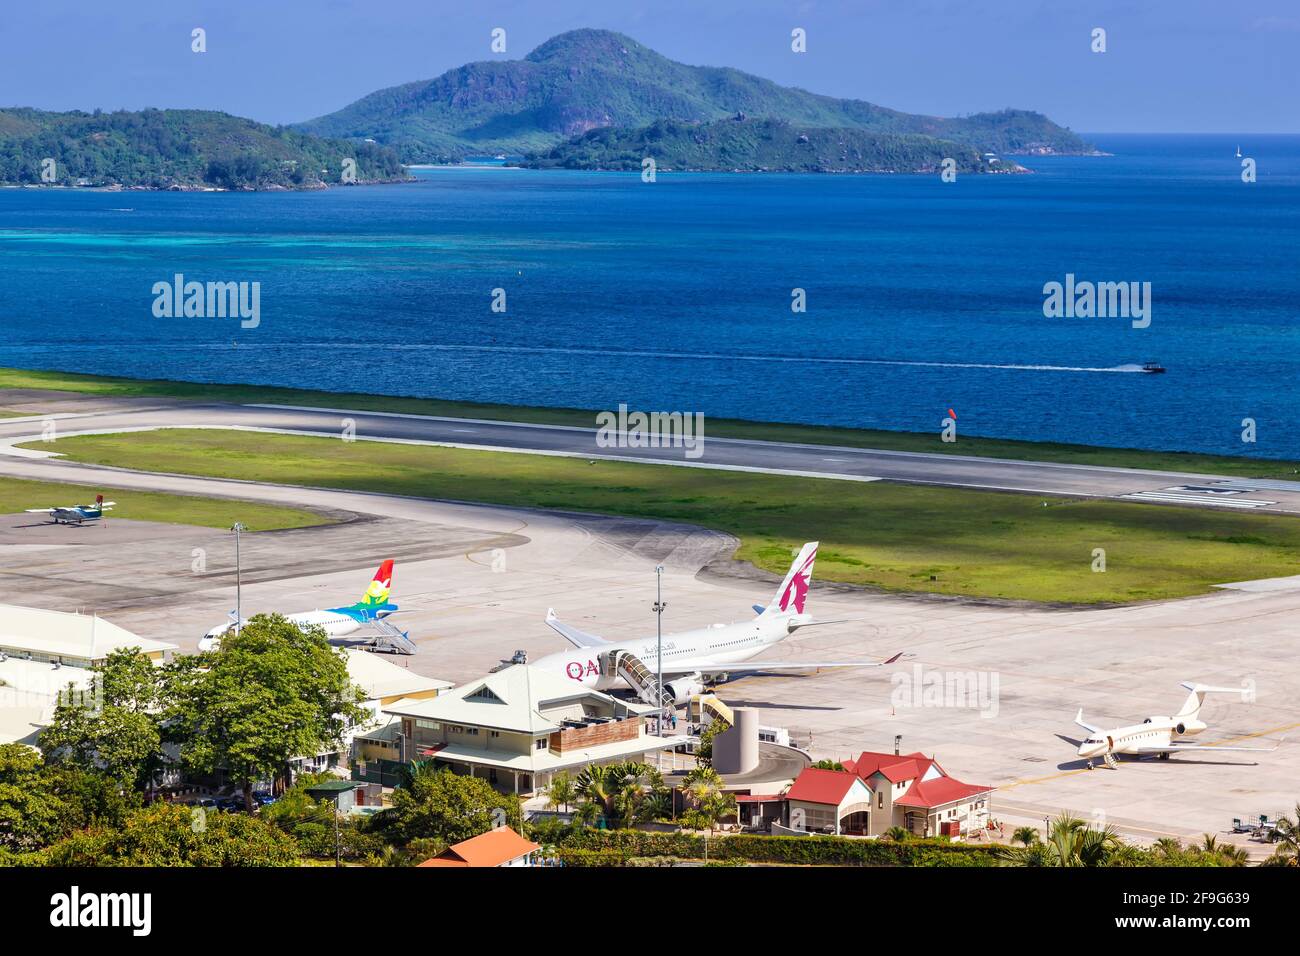 Mahe, Seychelles - November 26, 2017: An overview of Seychelles International Airport (SEZ) in the Seychelles. Stock Photo